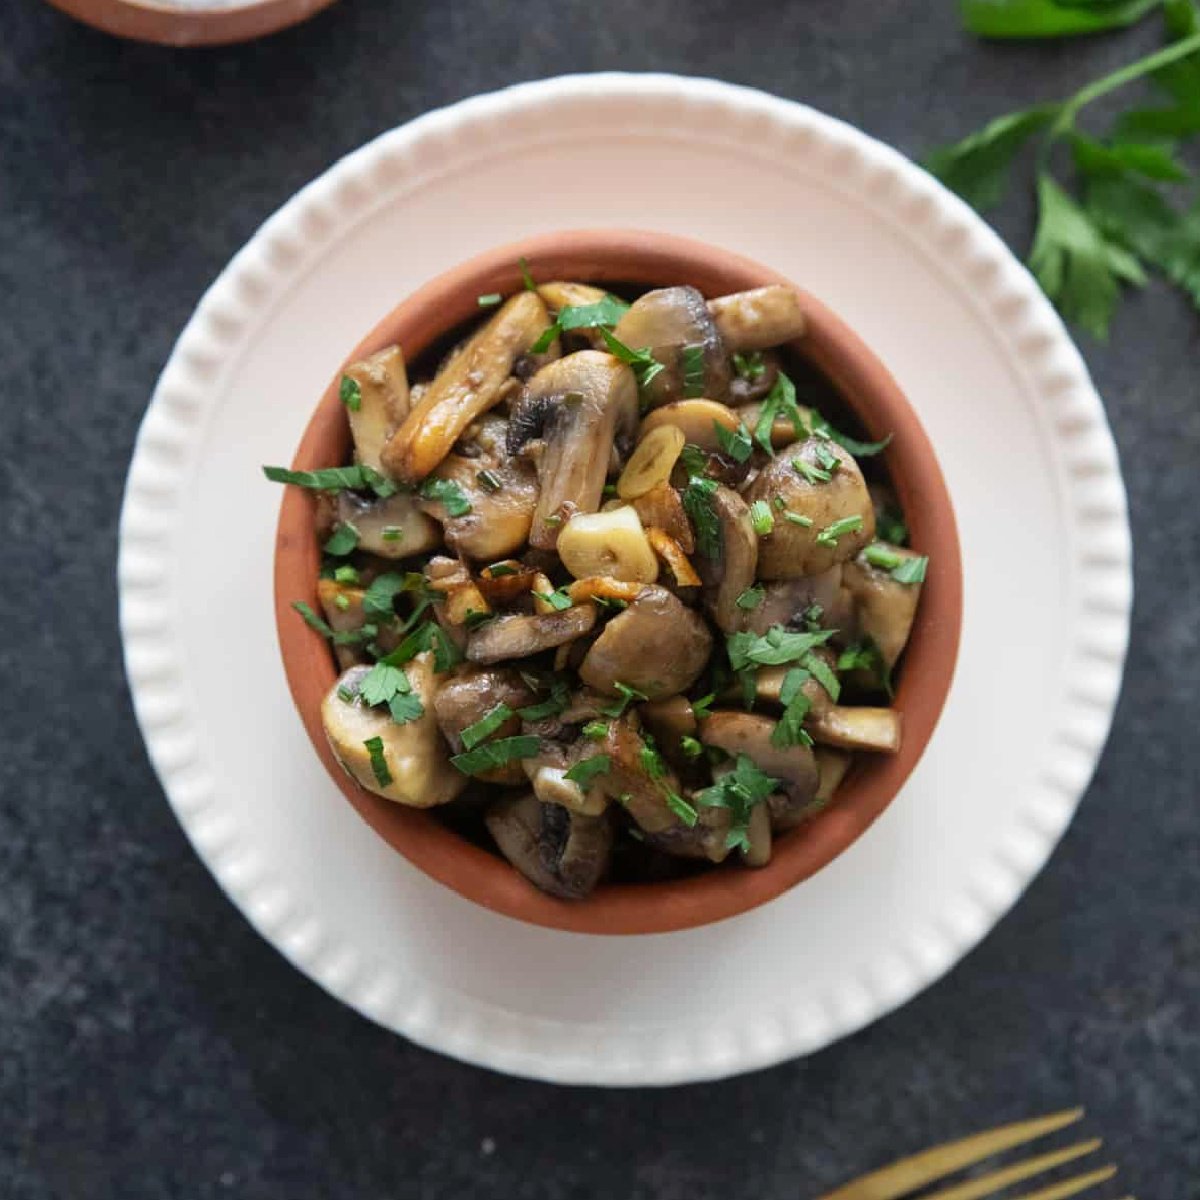 Spanish garlic mushrooms is a classic tapa that's ready in 15 minutes. It's made with 4 ingredients and is naturally vegan. Serve with some toasted crusty bread for the ultimate tapas experience!
